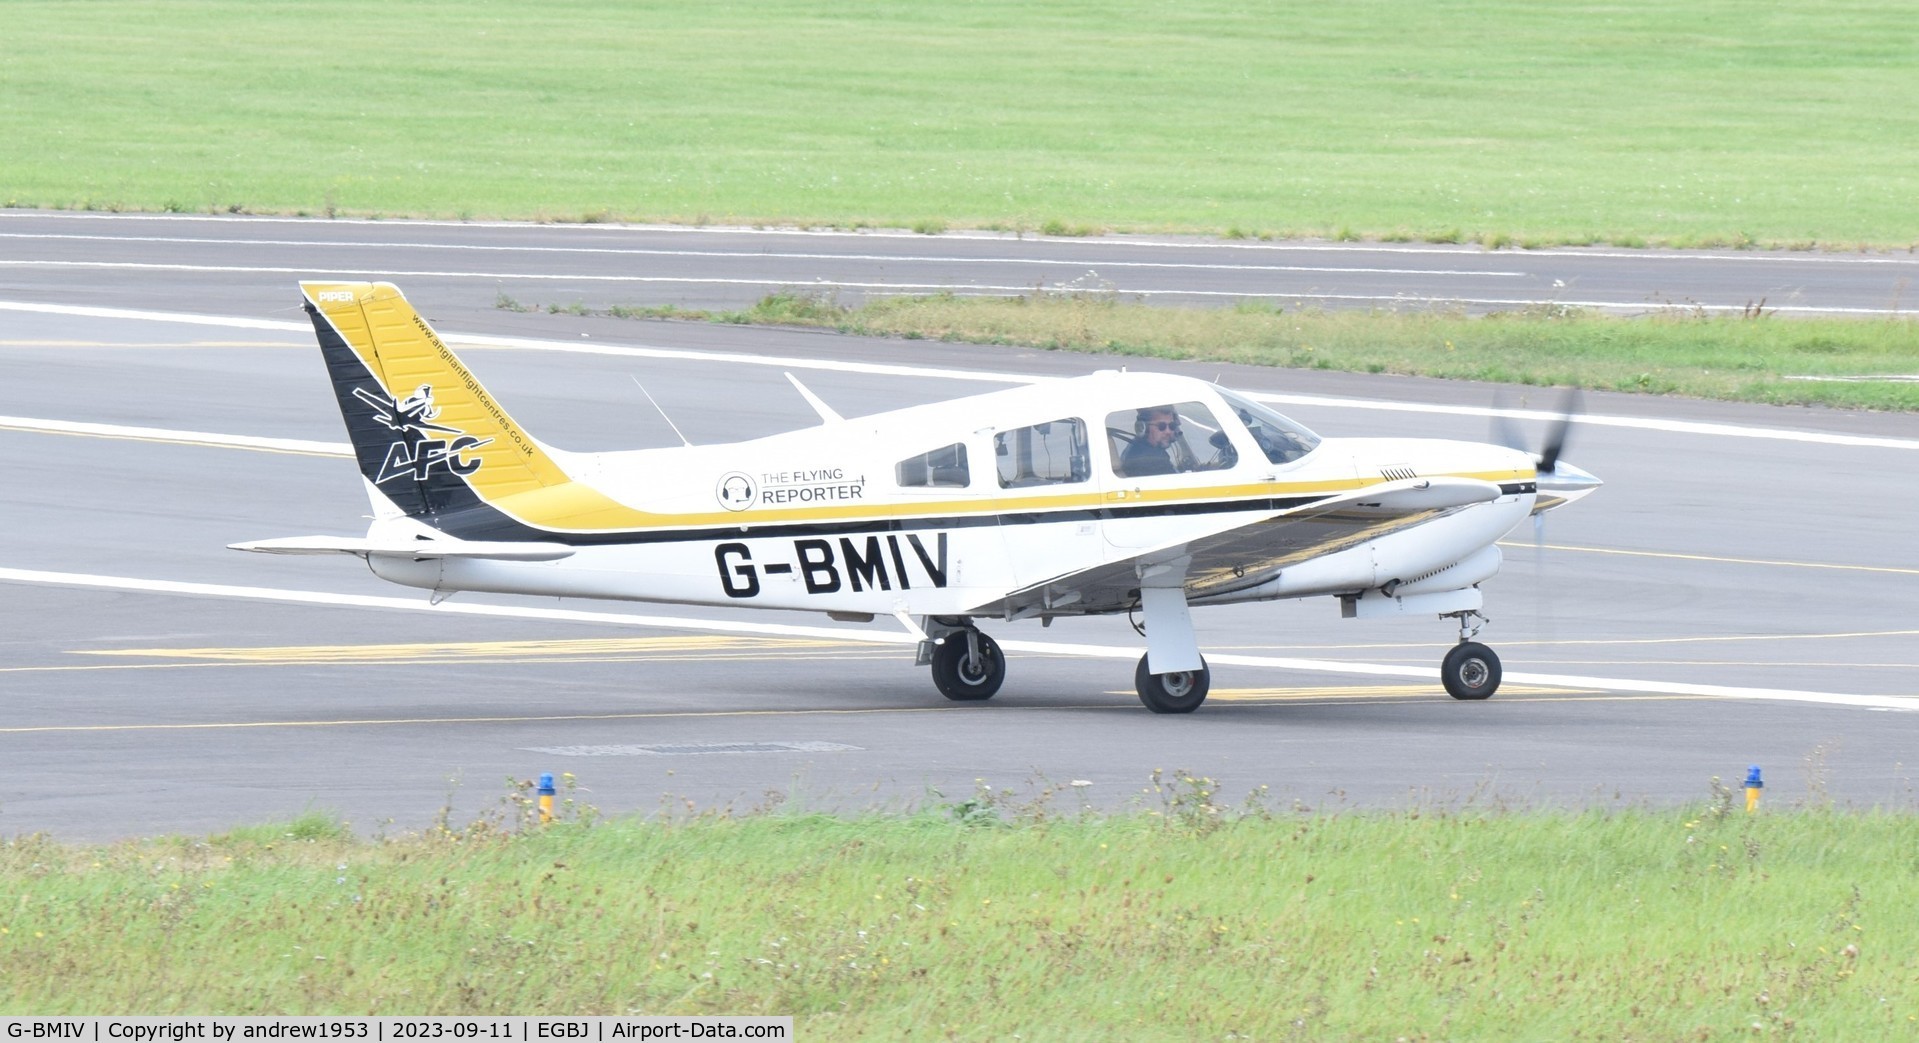 G-BMIV, 1977 Piper PA-28R-201T Cherokee Arrow III C/N 28R-7703154, G-BMIV at Gloucestershire Airport.